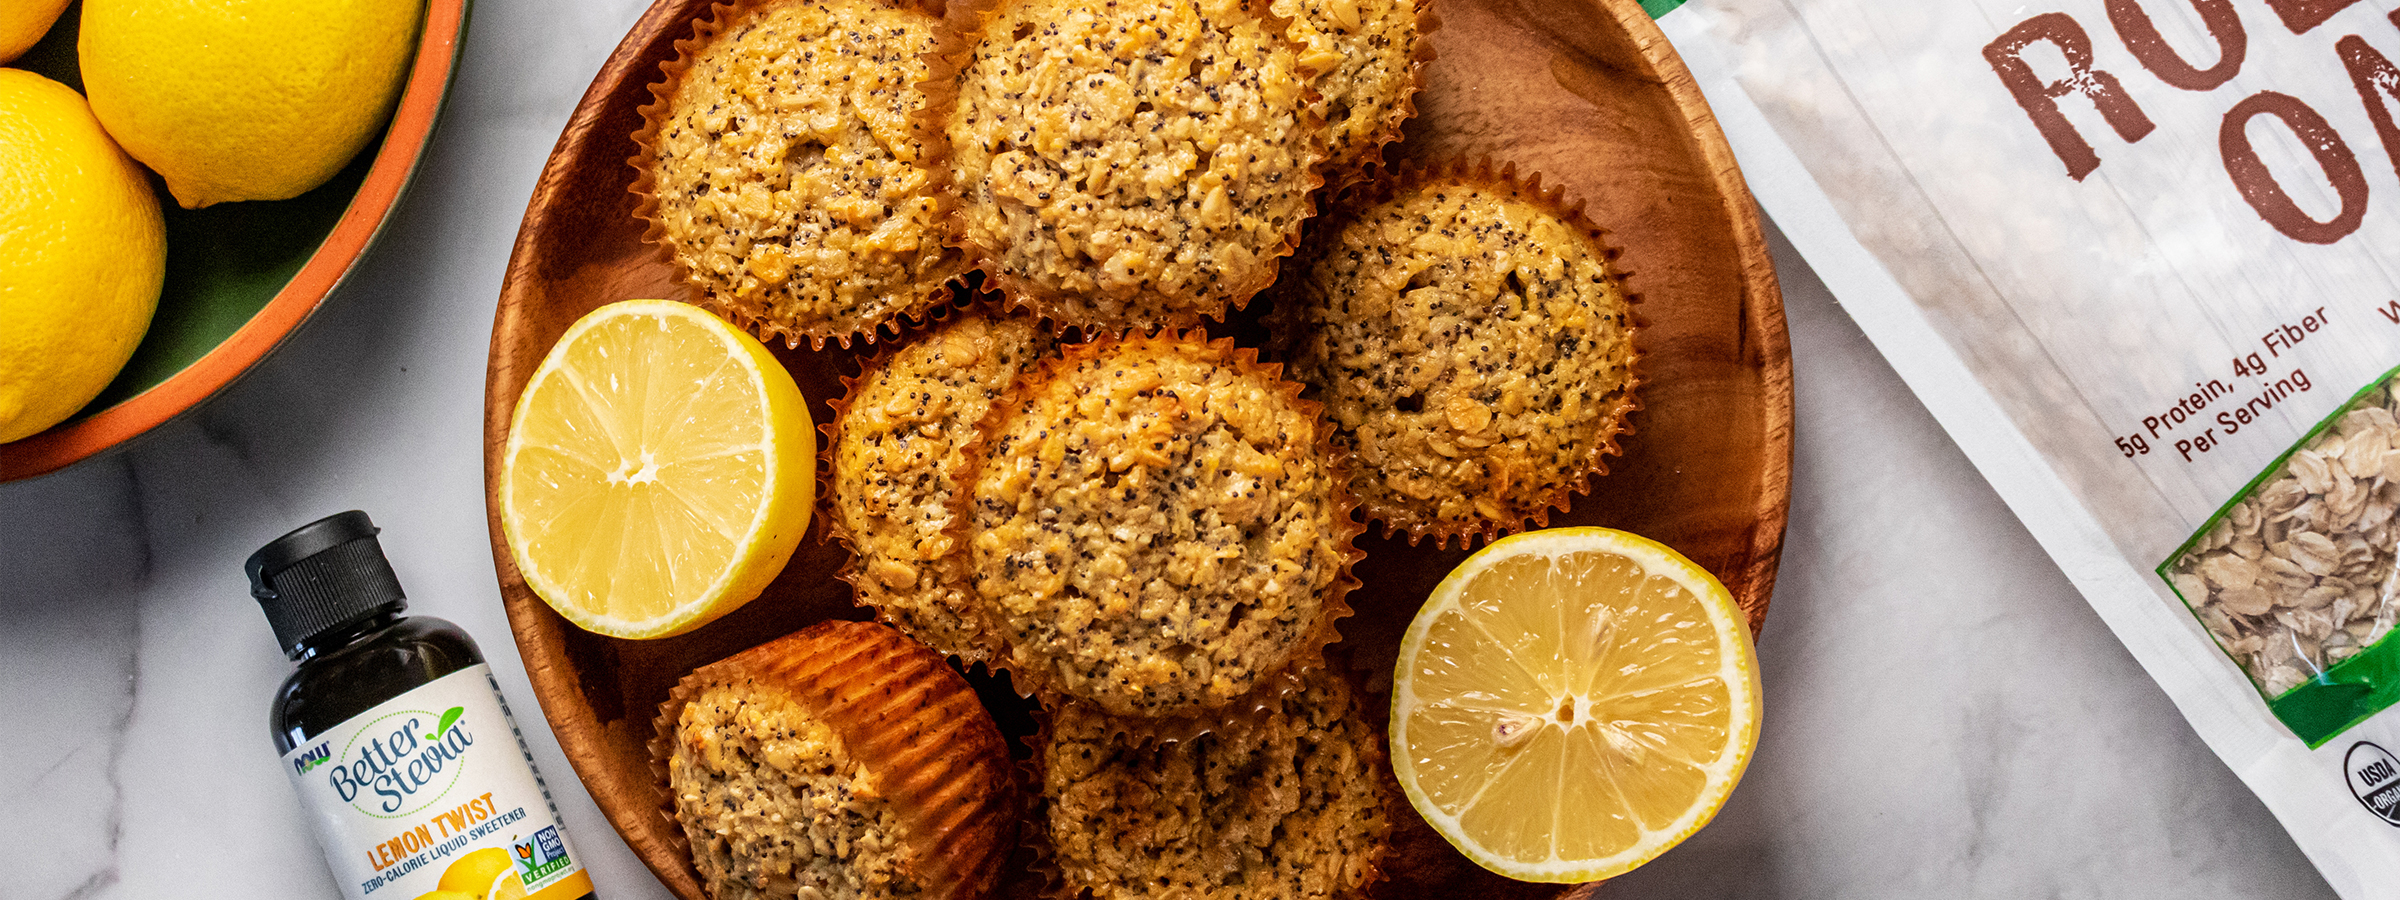 top view of Lemon Poppyseed Oat Muffins next to bottle of BetterStevia Lemon Twist and NOW Rolled Oats